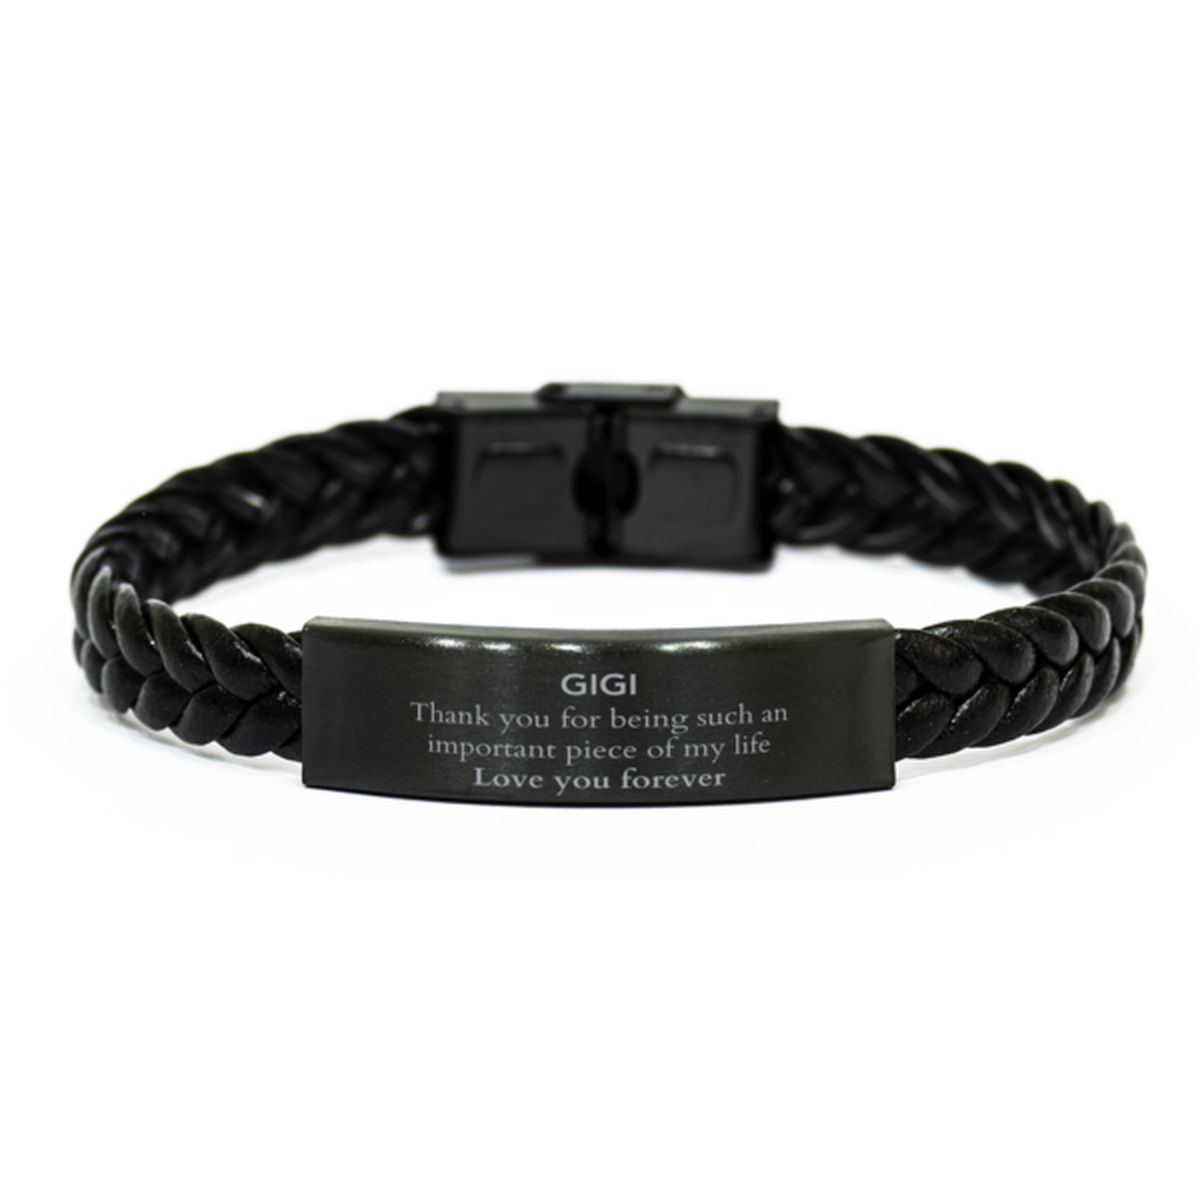 Appropriate Gigi Braided Leather Bracelet Epic Birthday Gifts for Gigi Thank you for being such an important piece of my life Gigi Christmas Mothers Fathers Day